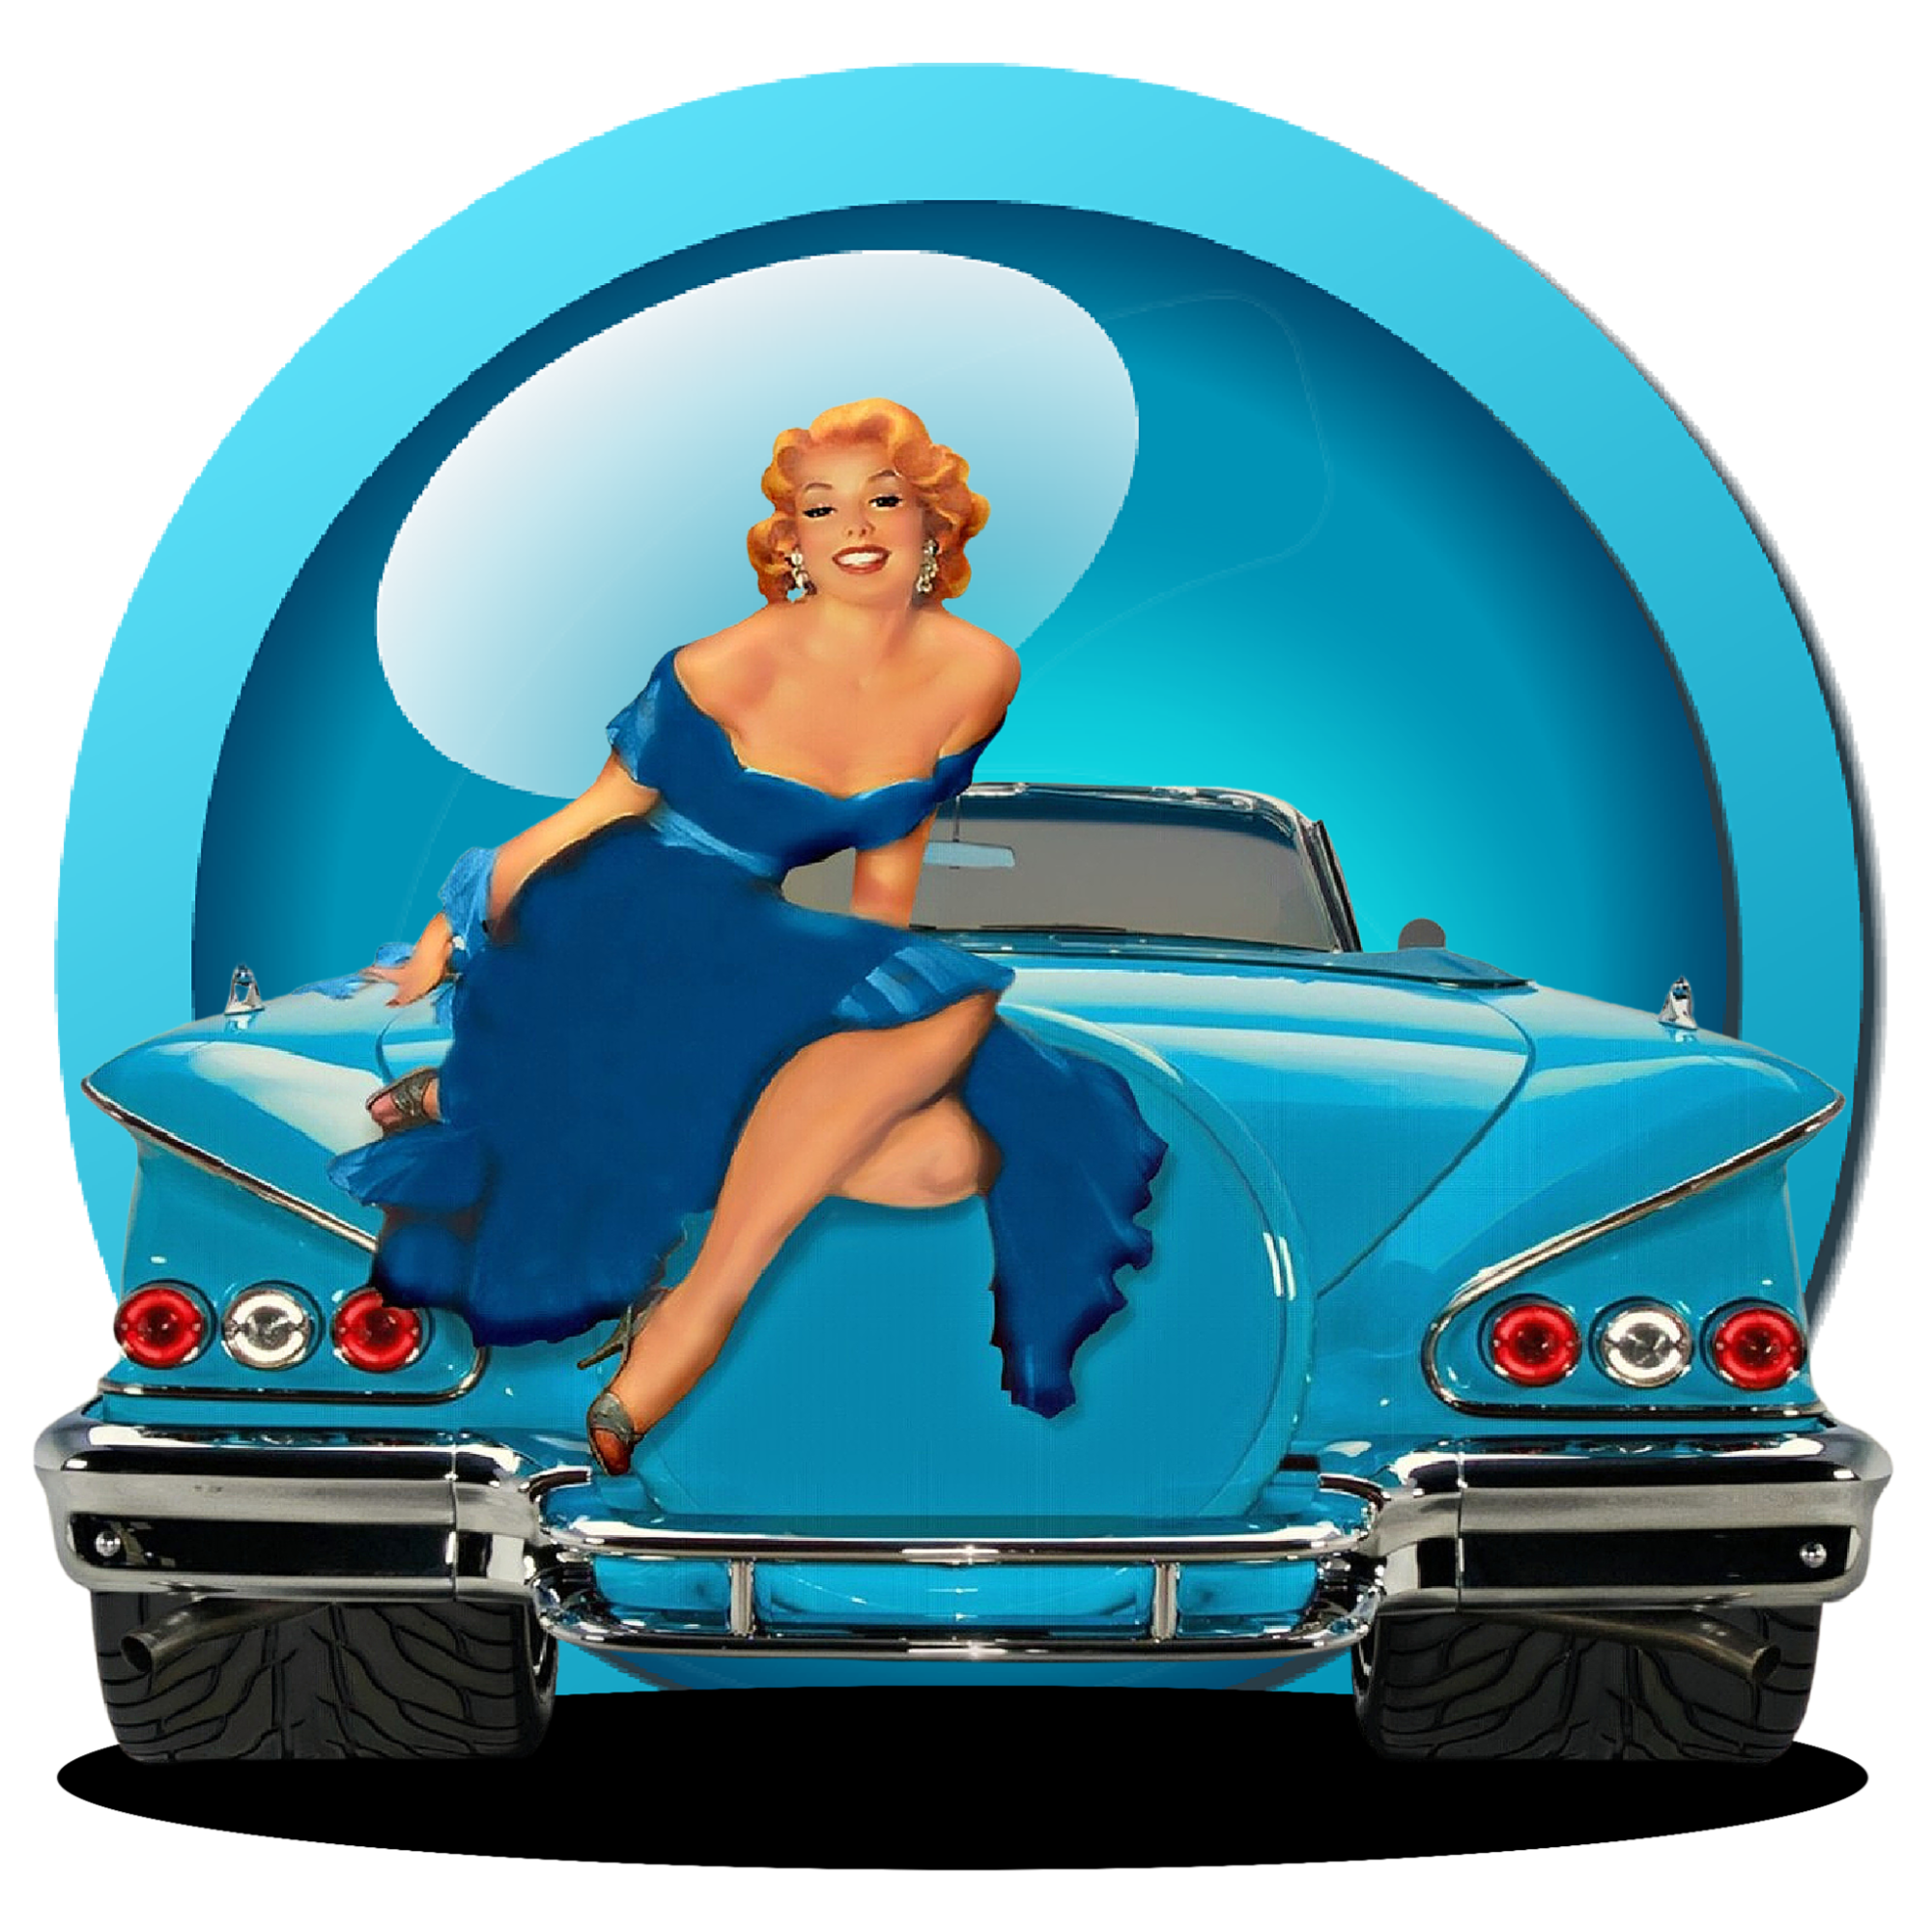 1958 Chevy Convertible with Pin Up Girl - Image